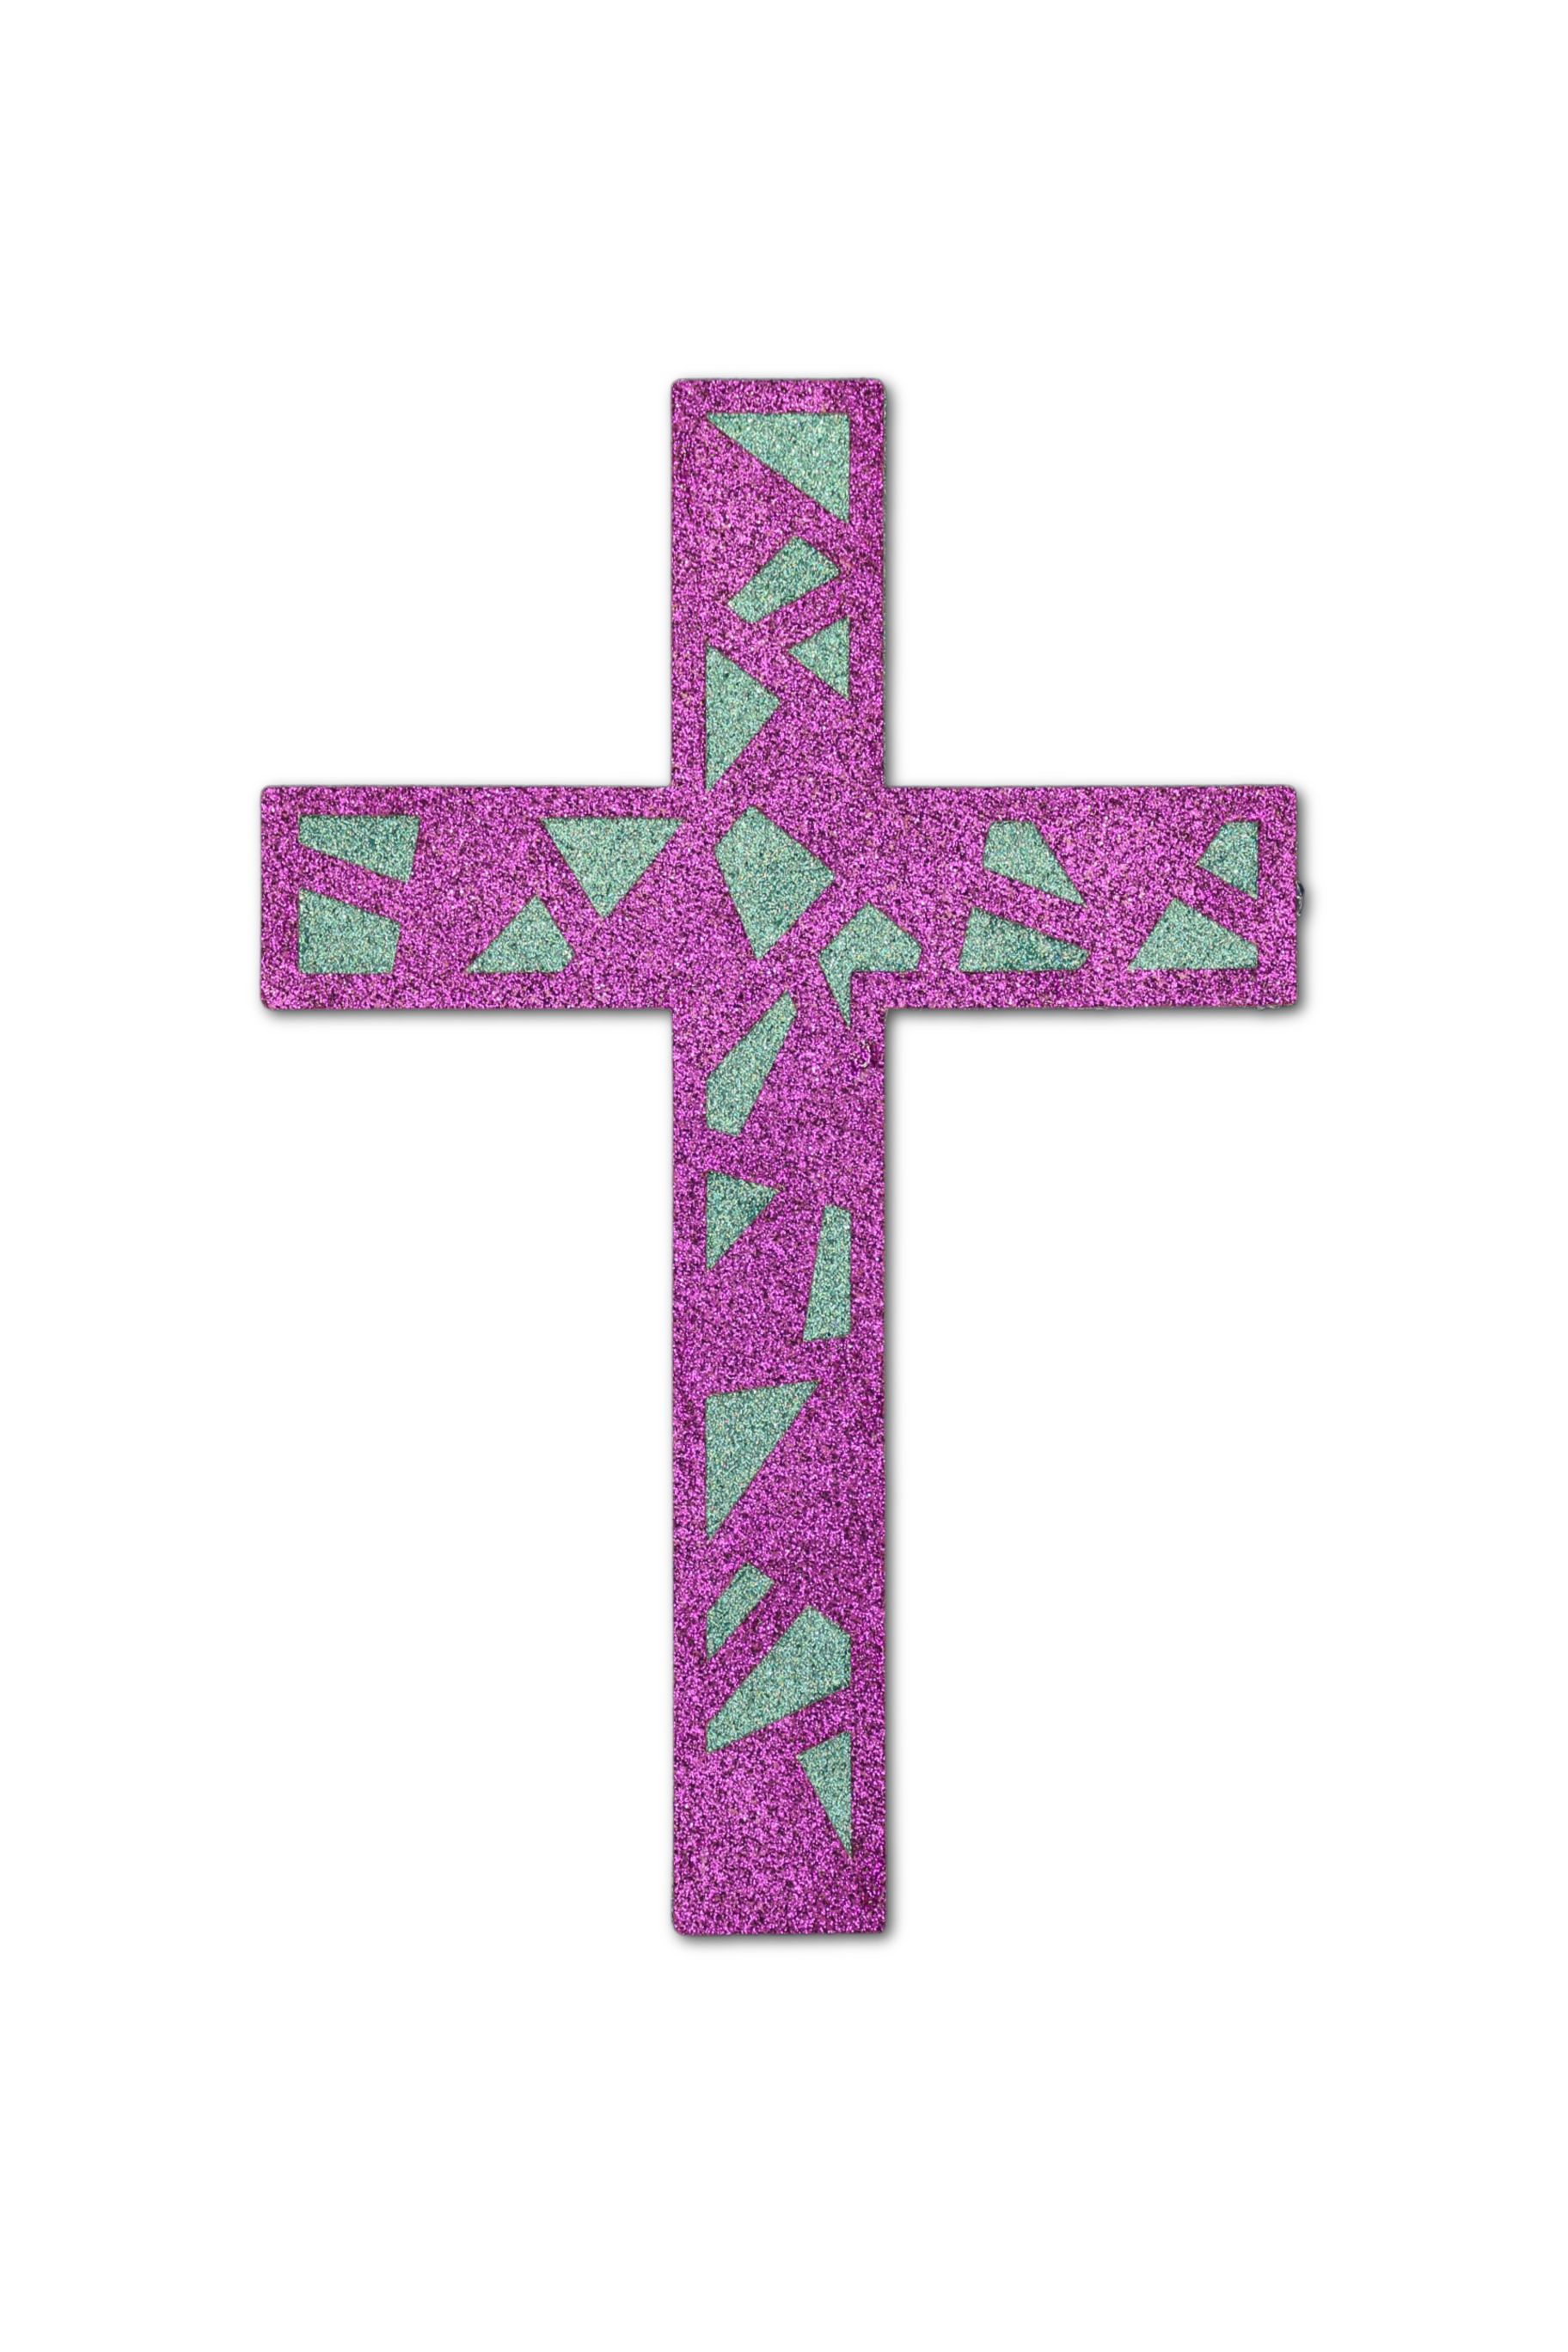 the first two layers of a paper cross